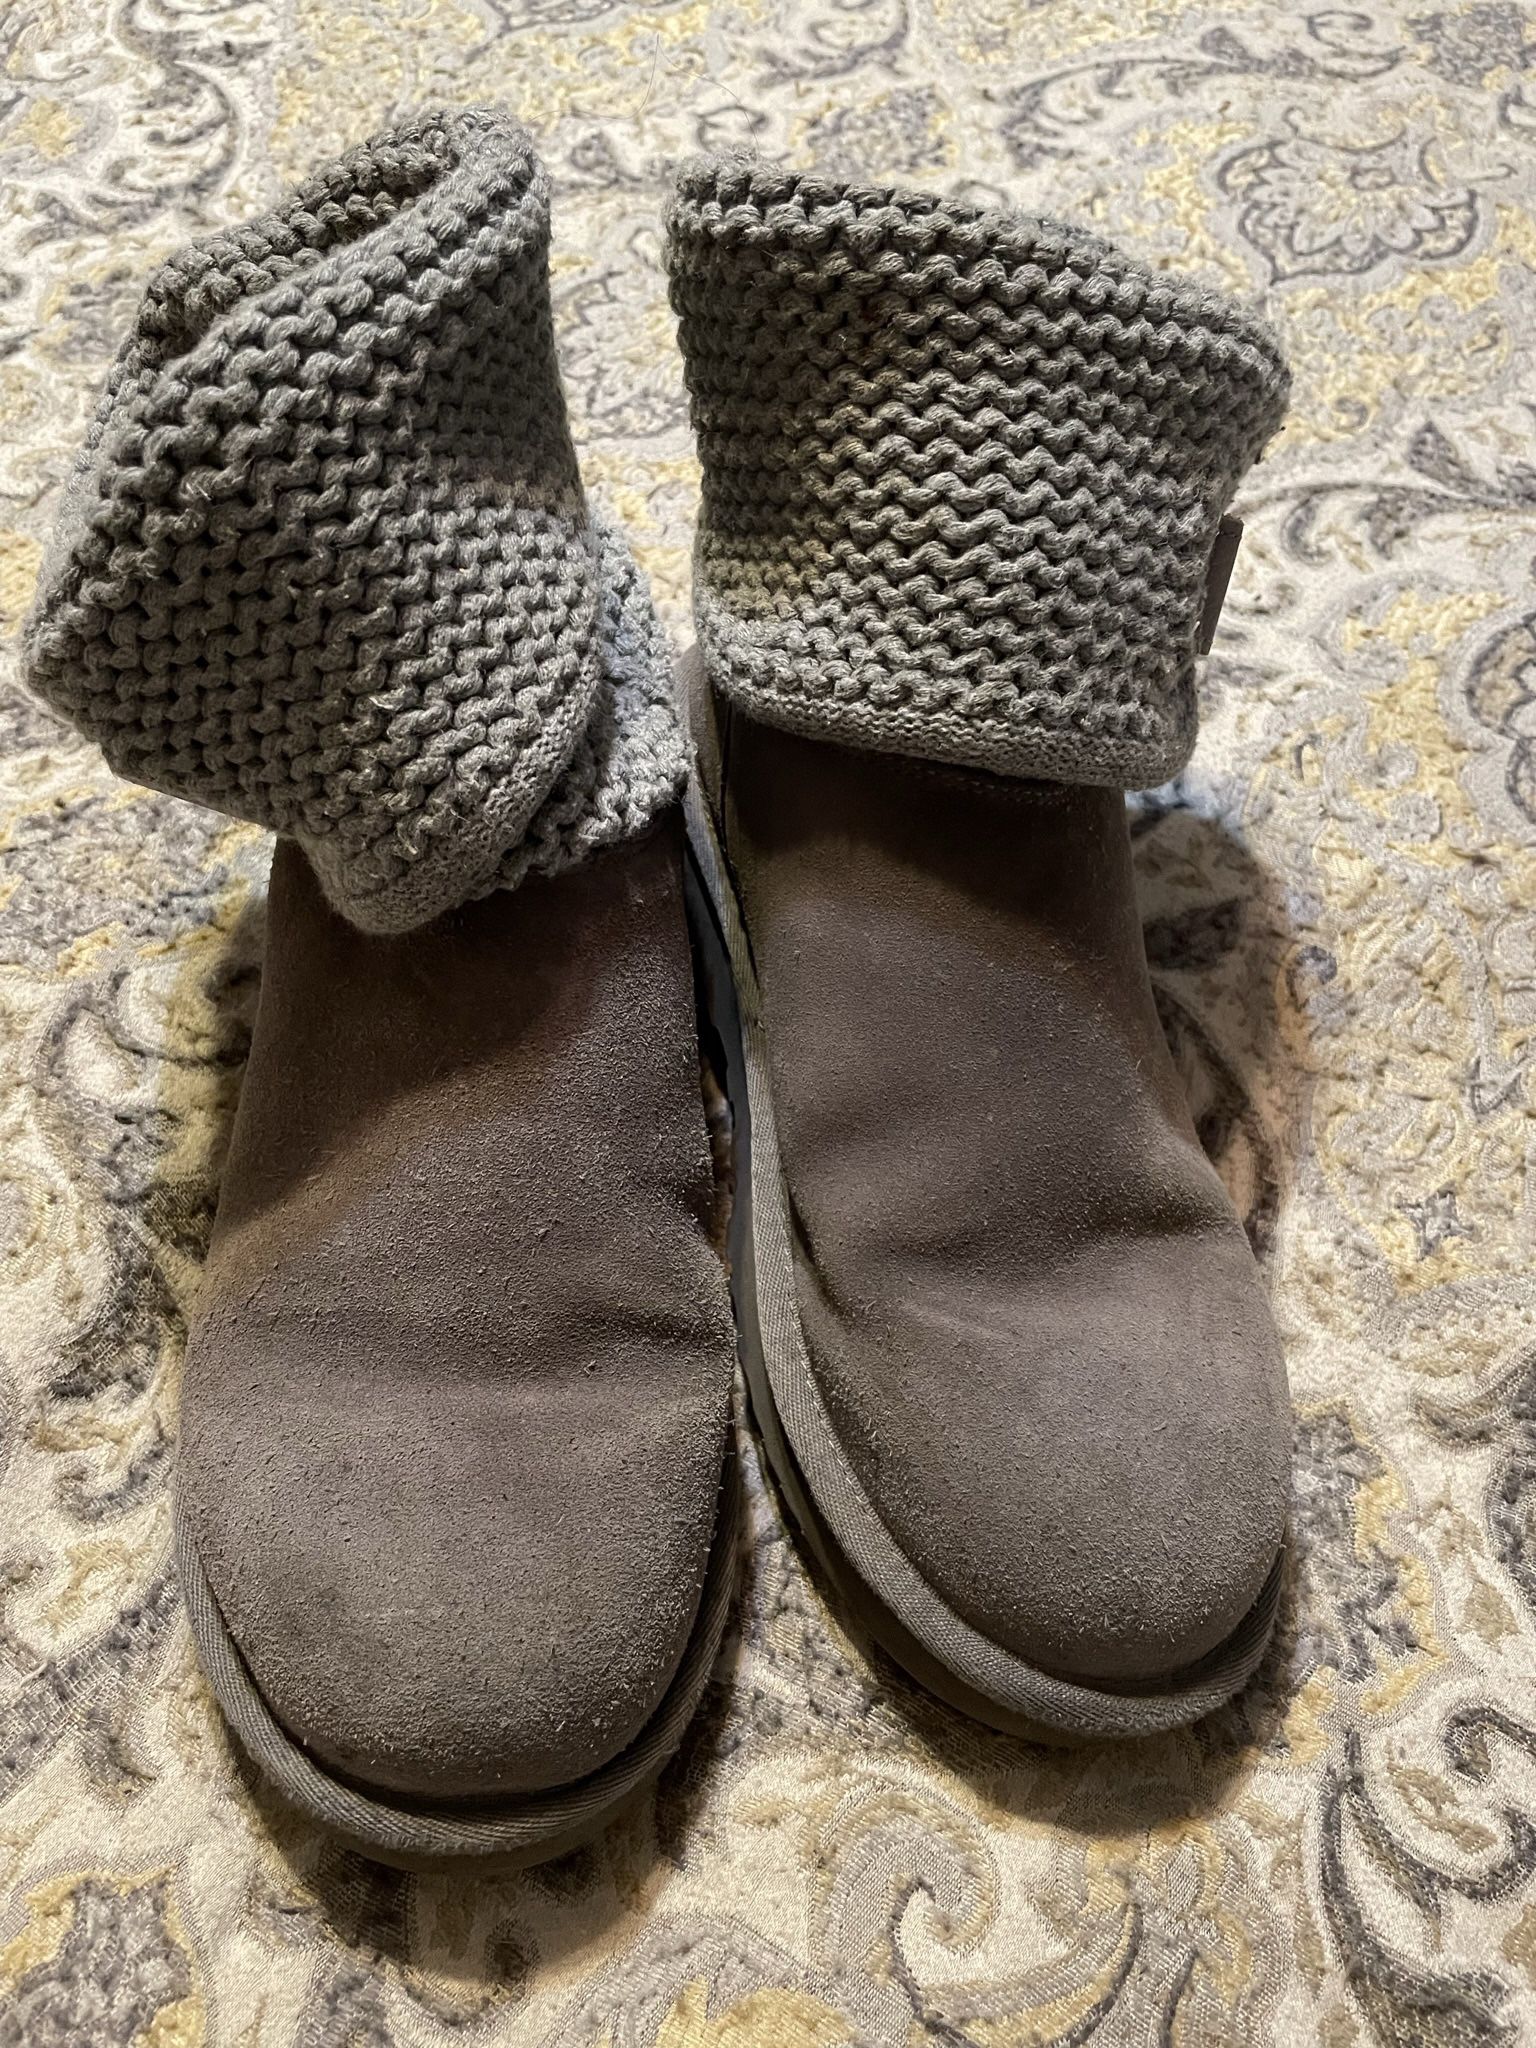 New Womens UGG Boots Size 8